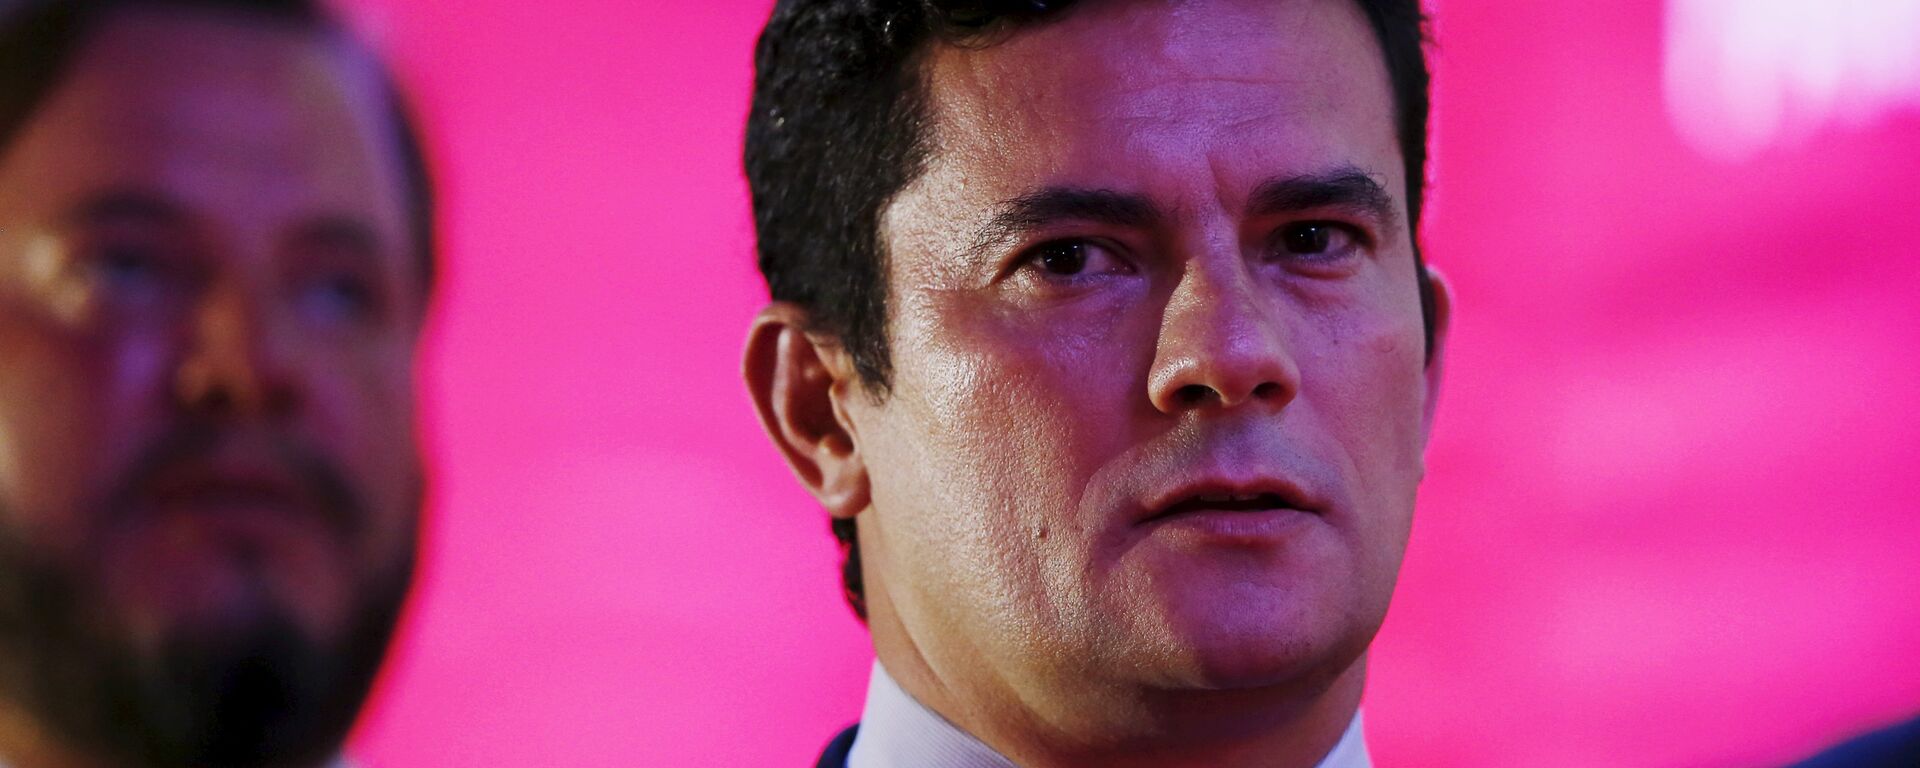 Federal Judge Sergio Moro arrives to a meeting with businessmen in Curitiba, Brazil, March 9, 2016.  - Sputnik Mundo, 1920, 24.03.2021